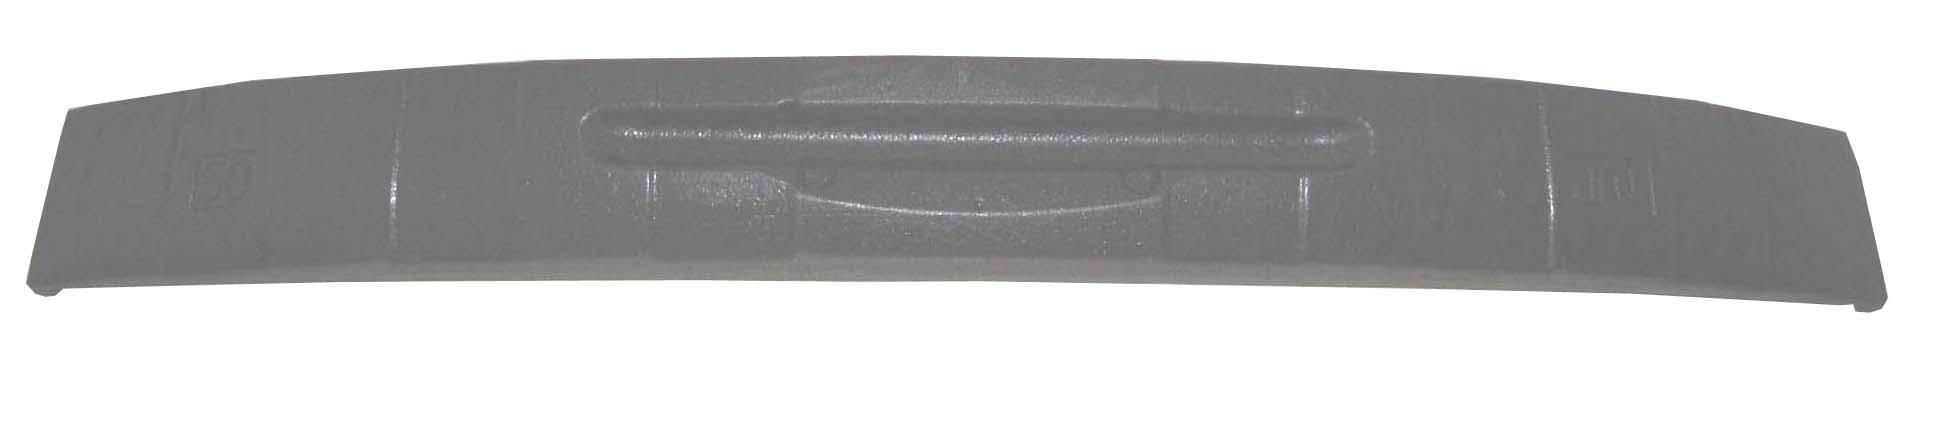 Aftermarket ENERGY ABSORBERS for TOYOTA - COROLLA, COROLLA,09-10,Front bumper energy absorber